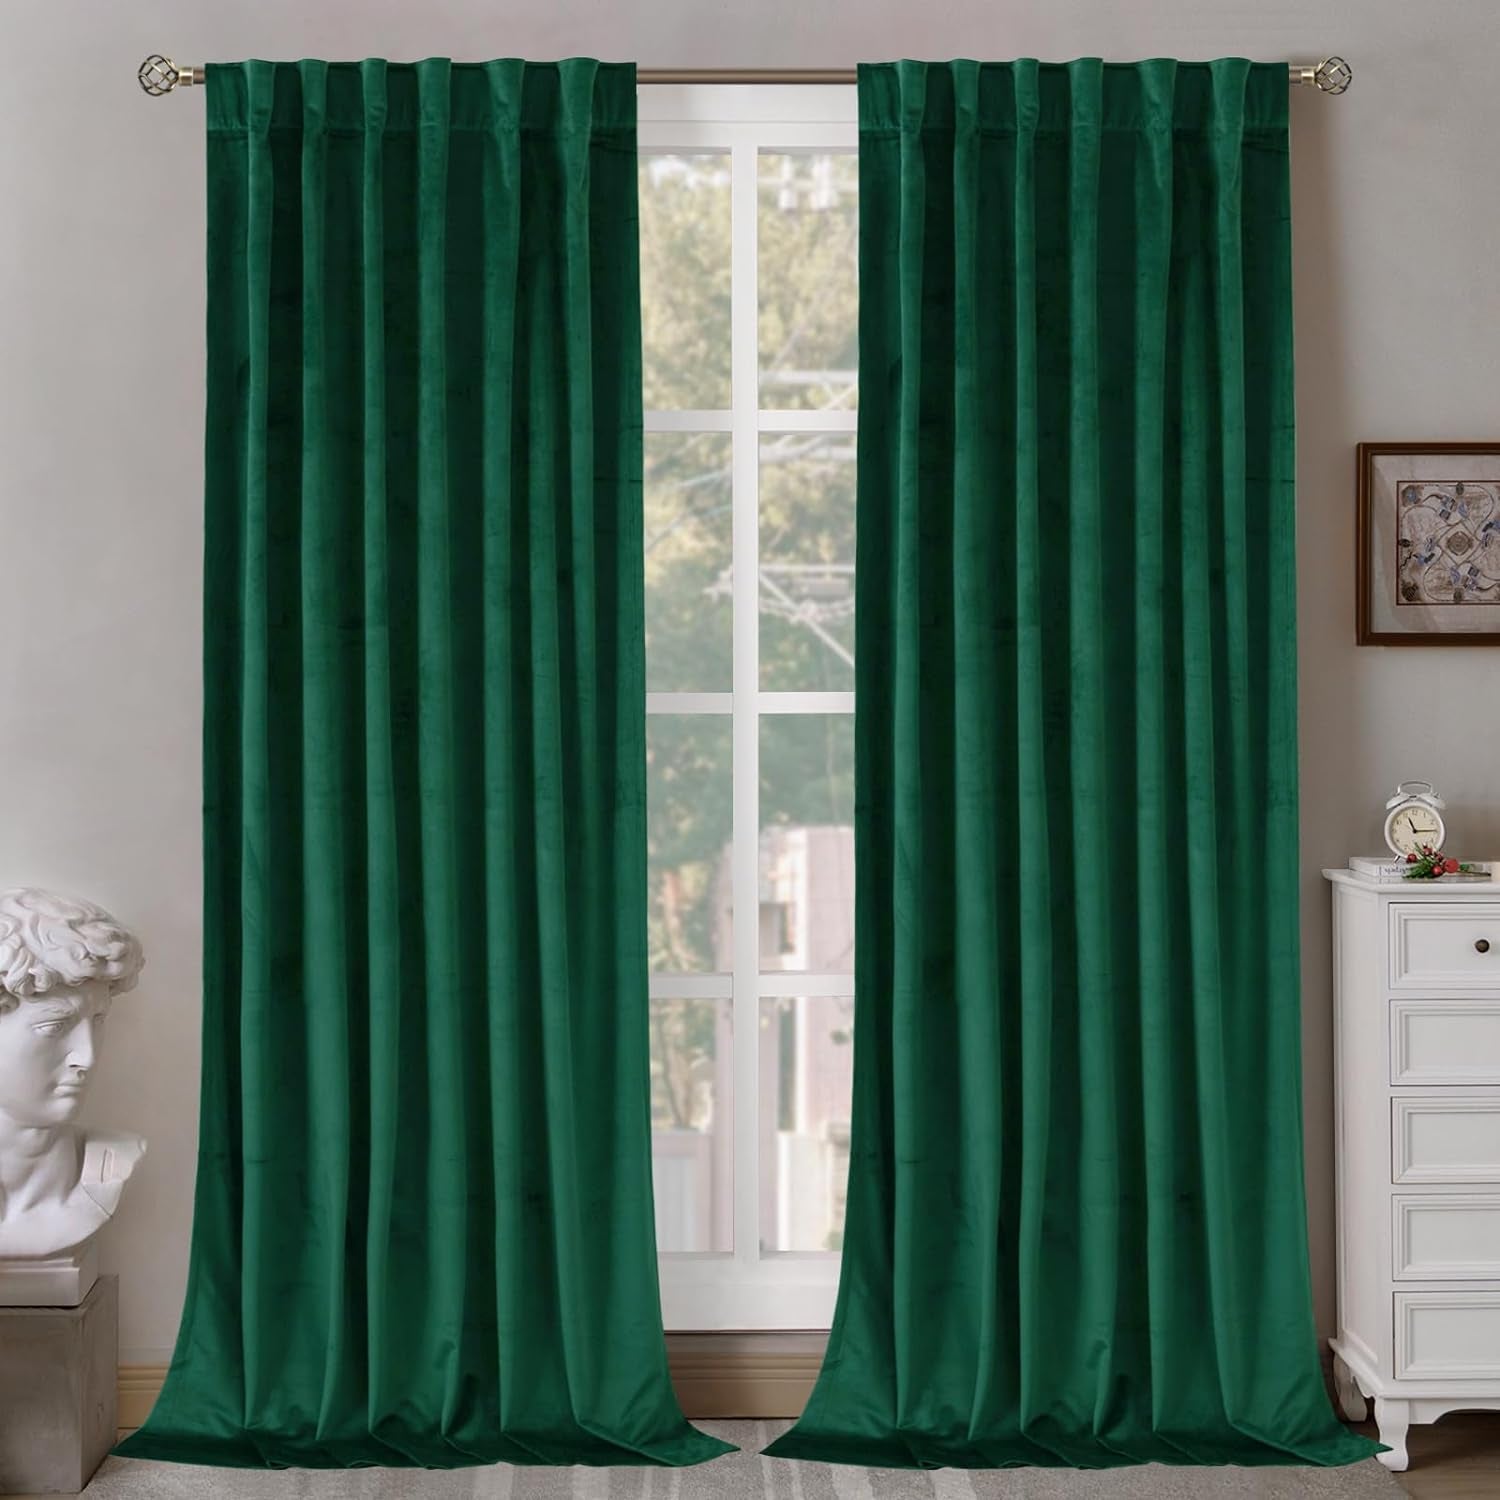 Bgment Grey Velvet Curtains 108 Inches Long for Living Room, Thermal Insulated Room Darkening Curtains Drapes Window Treatment with Back Tab and Rod Pocket, Set of 2 Panels, 52 X 108 Inch  BGment Emerald 52W X 120L 